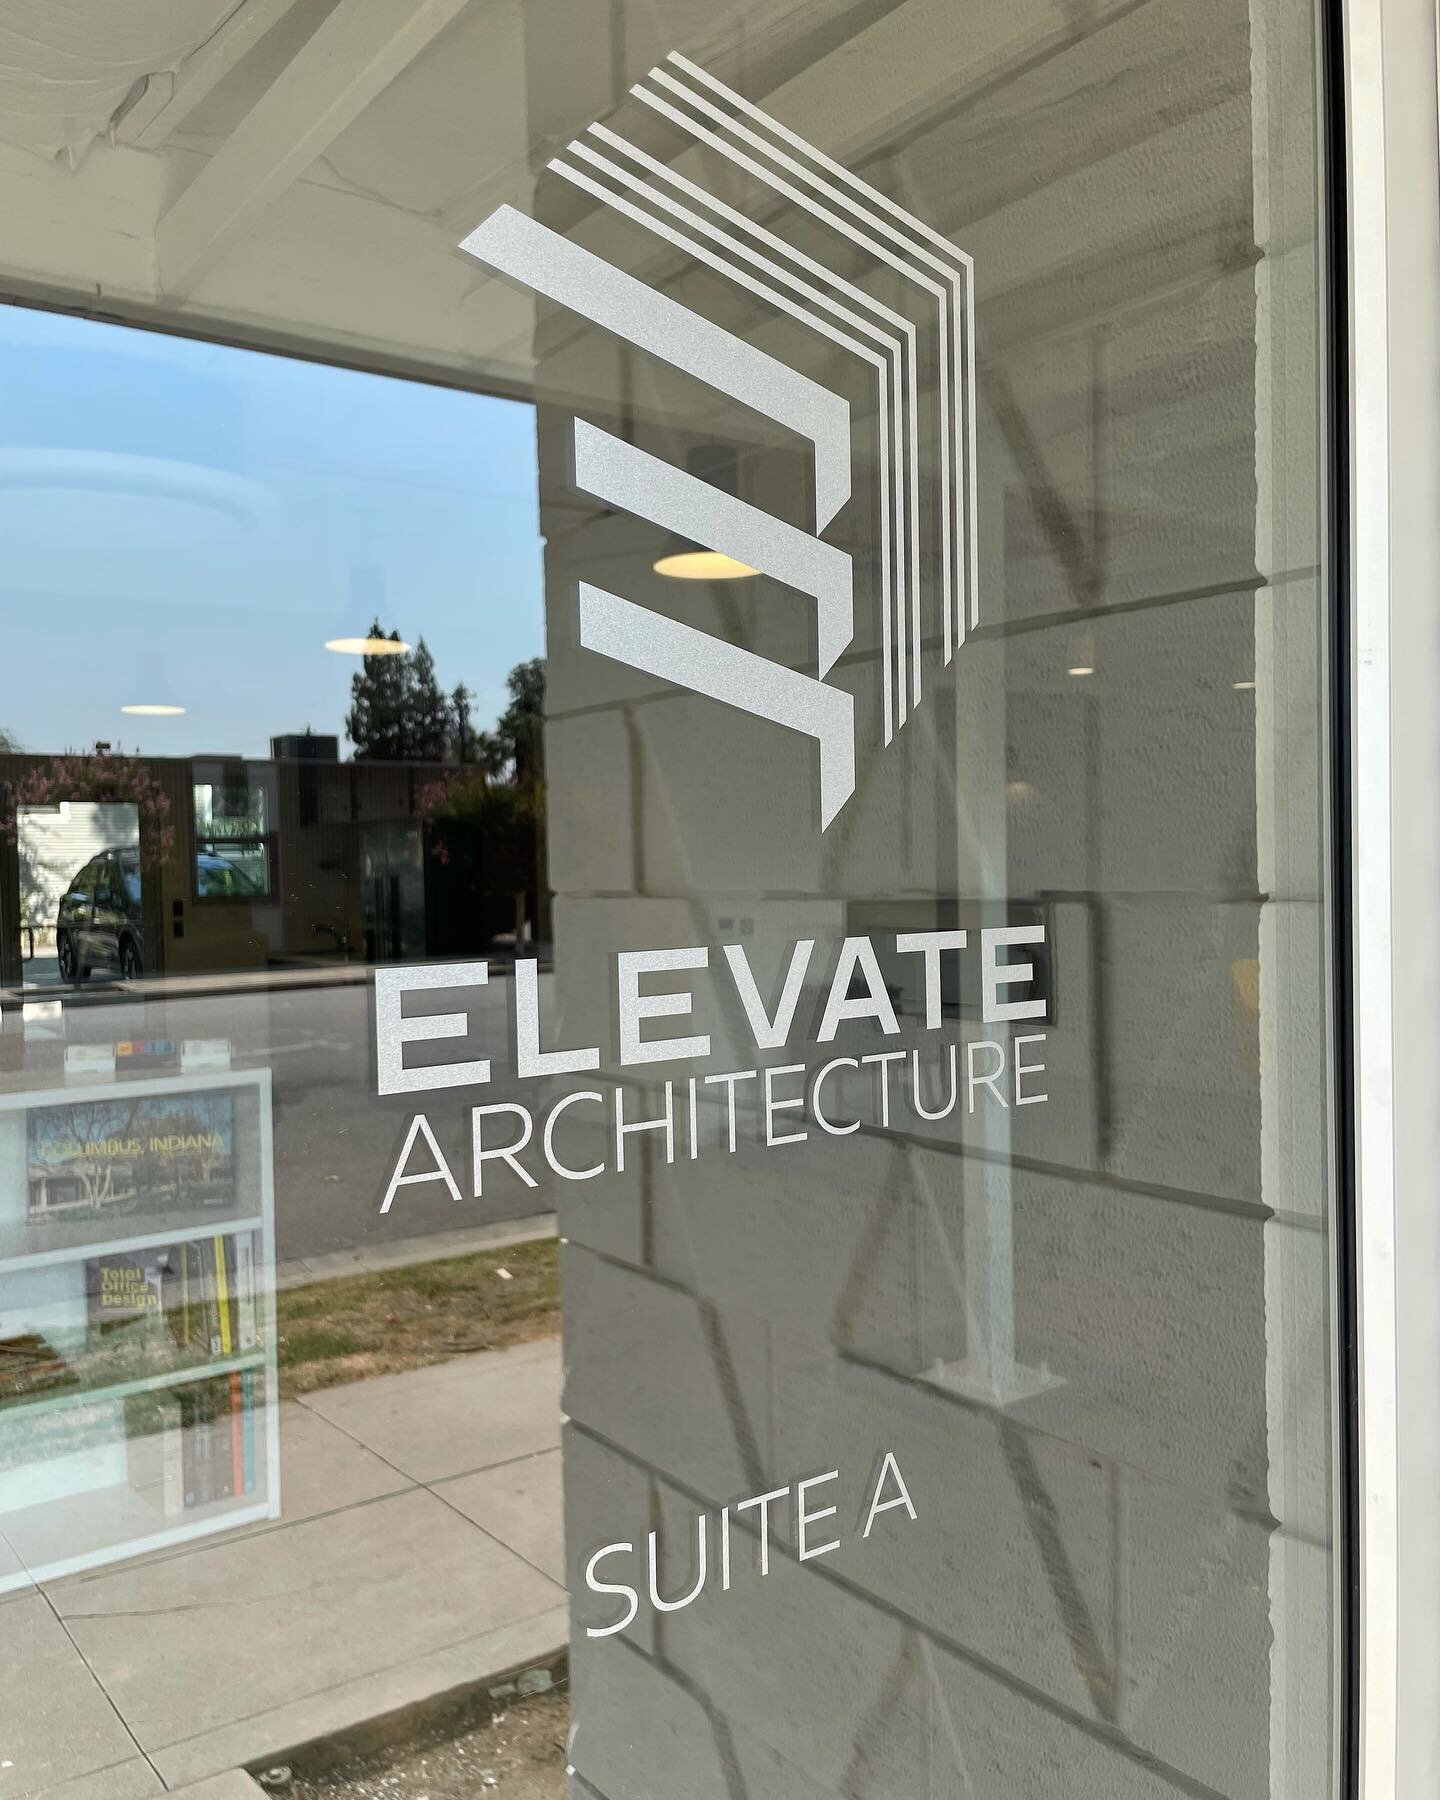 Excited to meet some great clients in our new space!

#bakersfield #architecture #bakersfieldarchitecture #beinbakersfield #downtown #elevatearchca #california #midcenturymodern #officespace